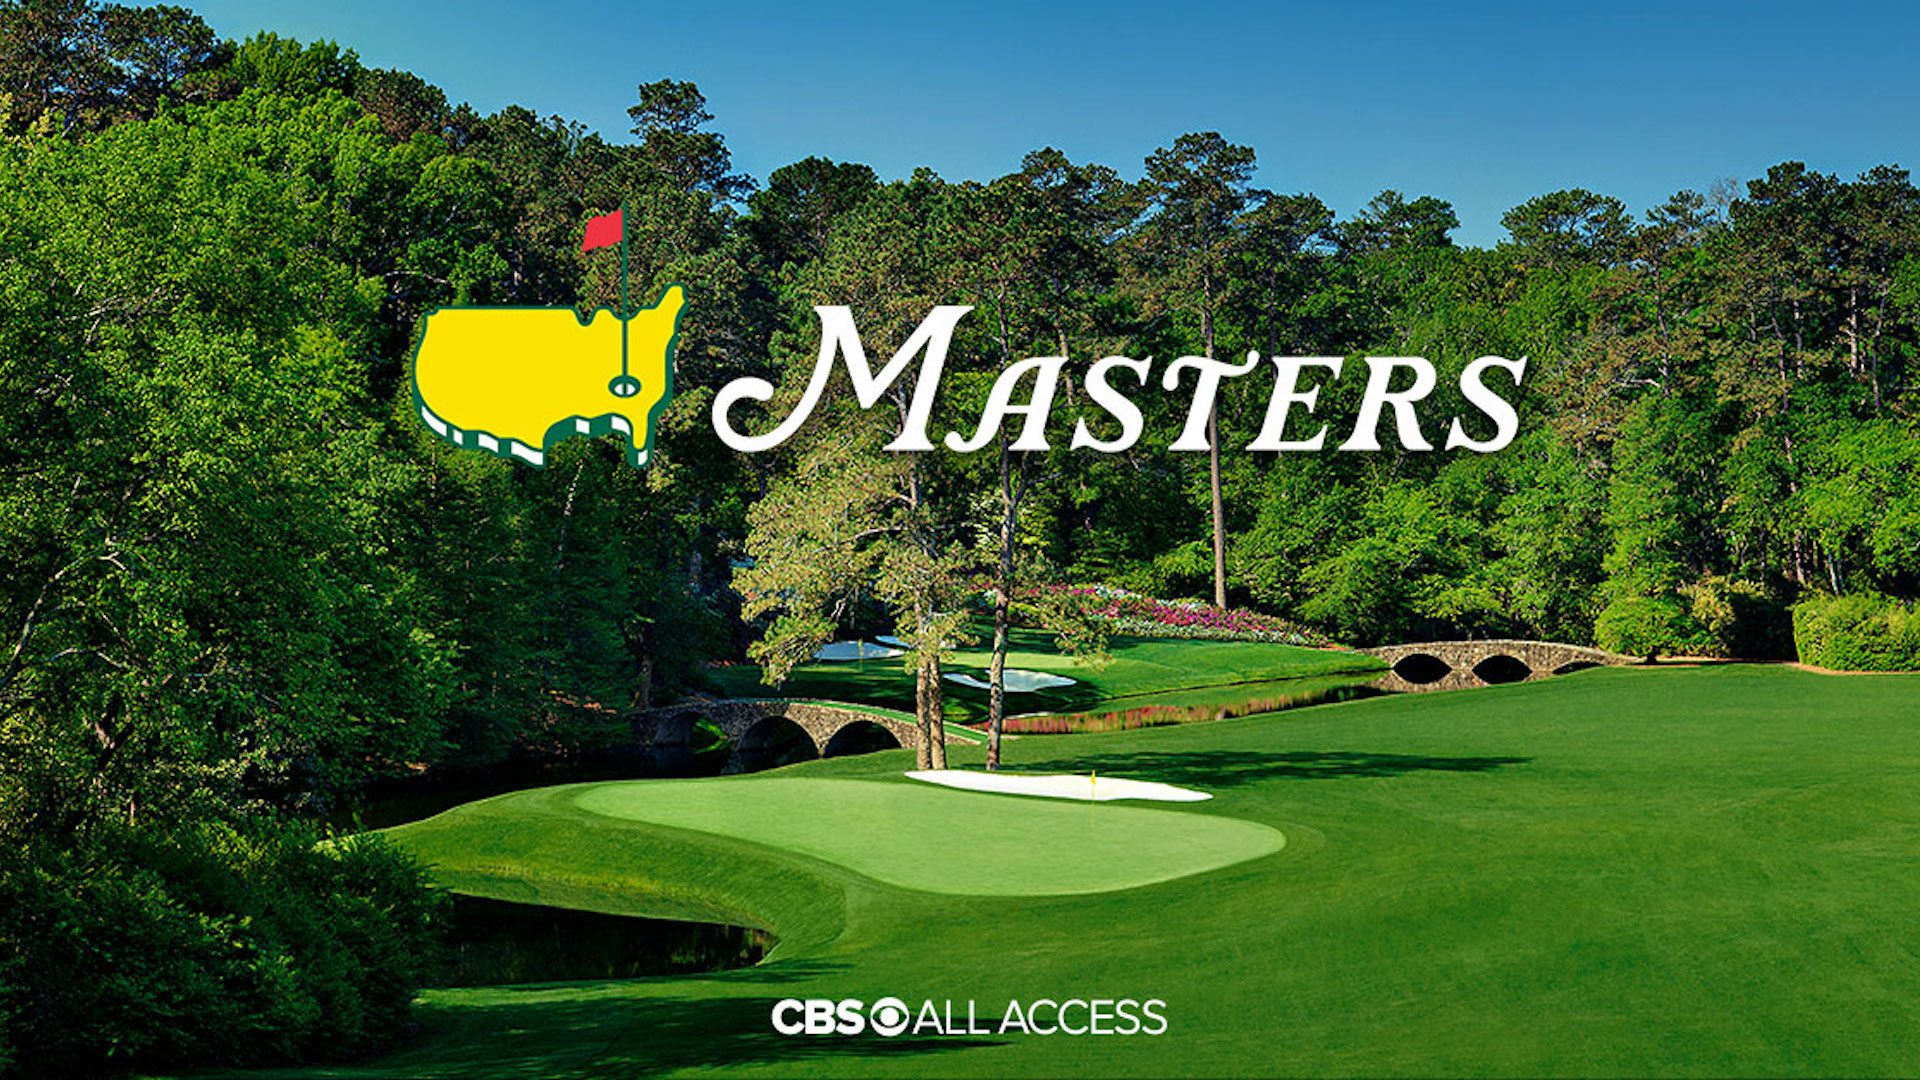 How could Augusta National make the Masters even better?